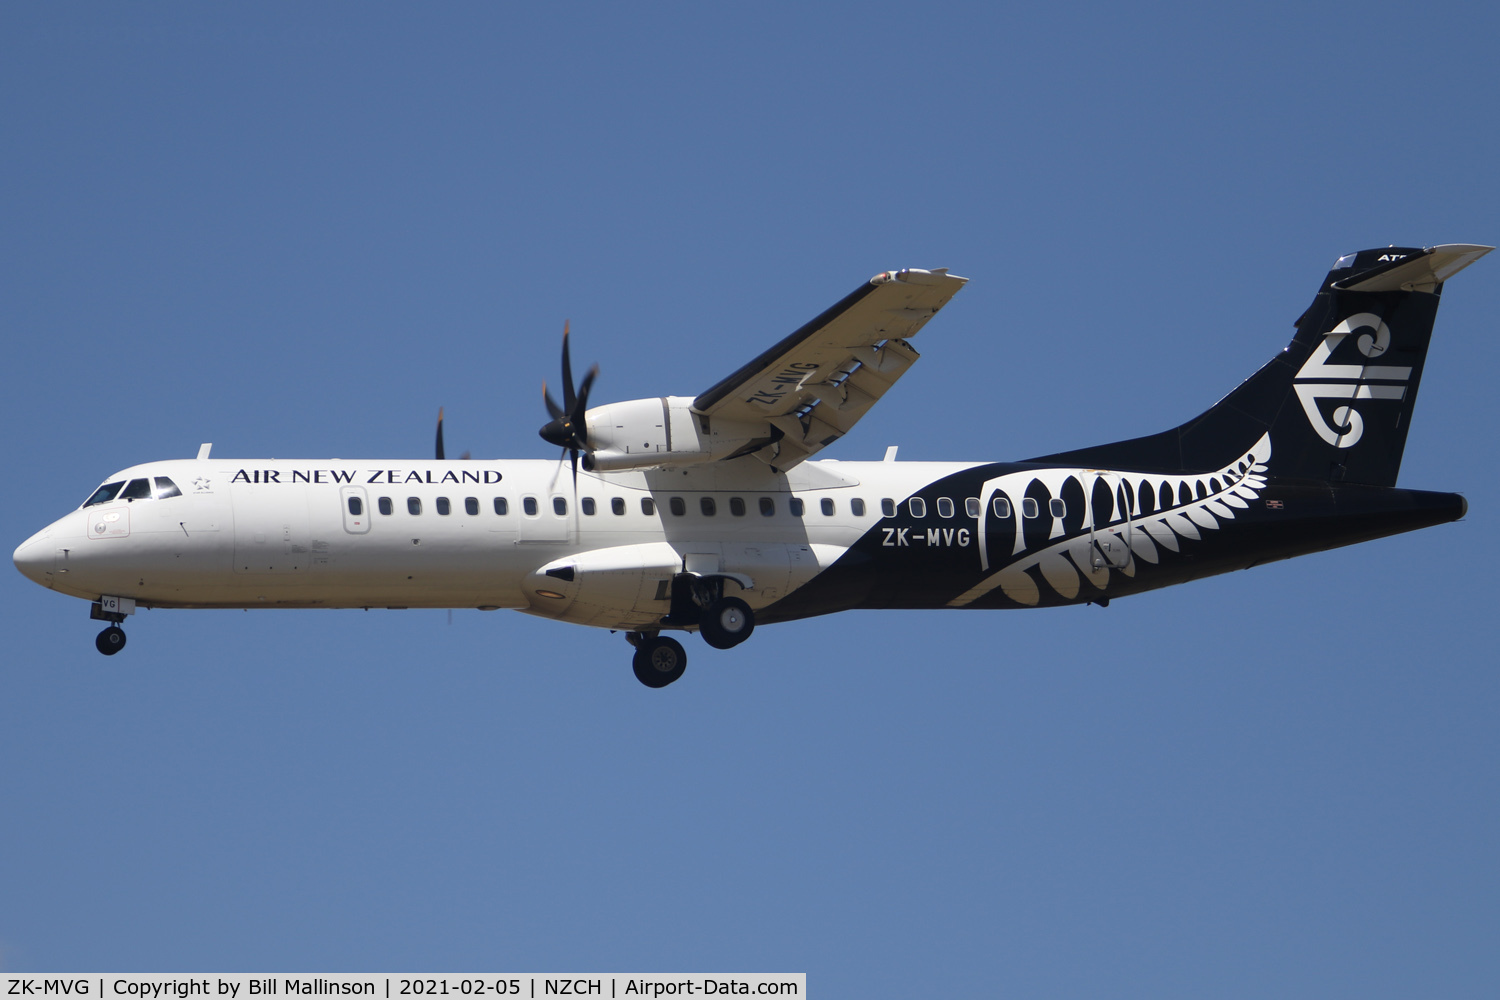 ZK-MVG, 2015 ATR 72-600 C/N 1264, from PMR